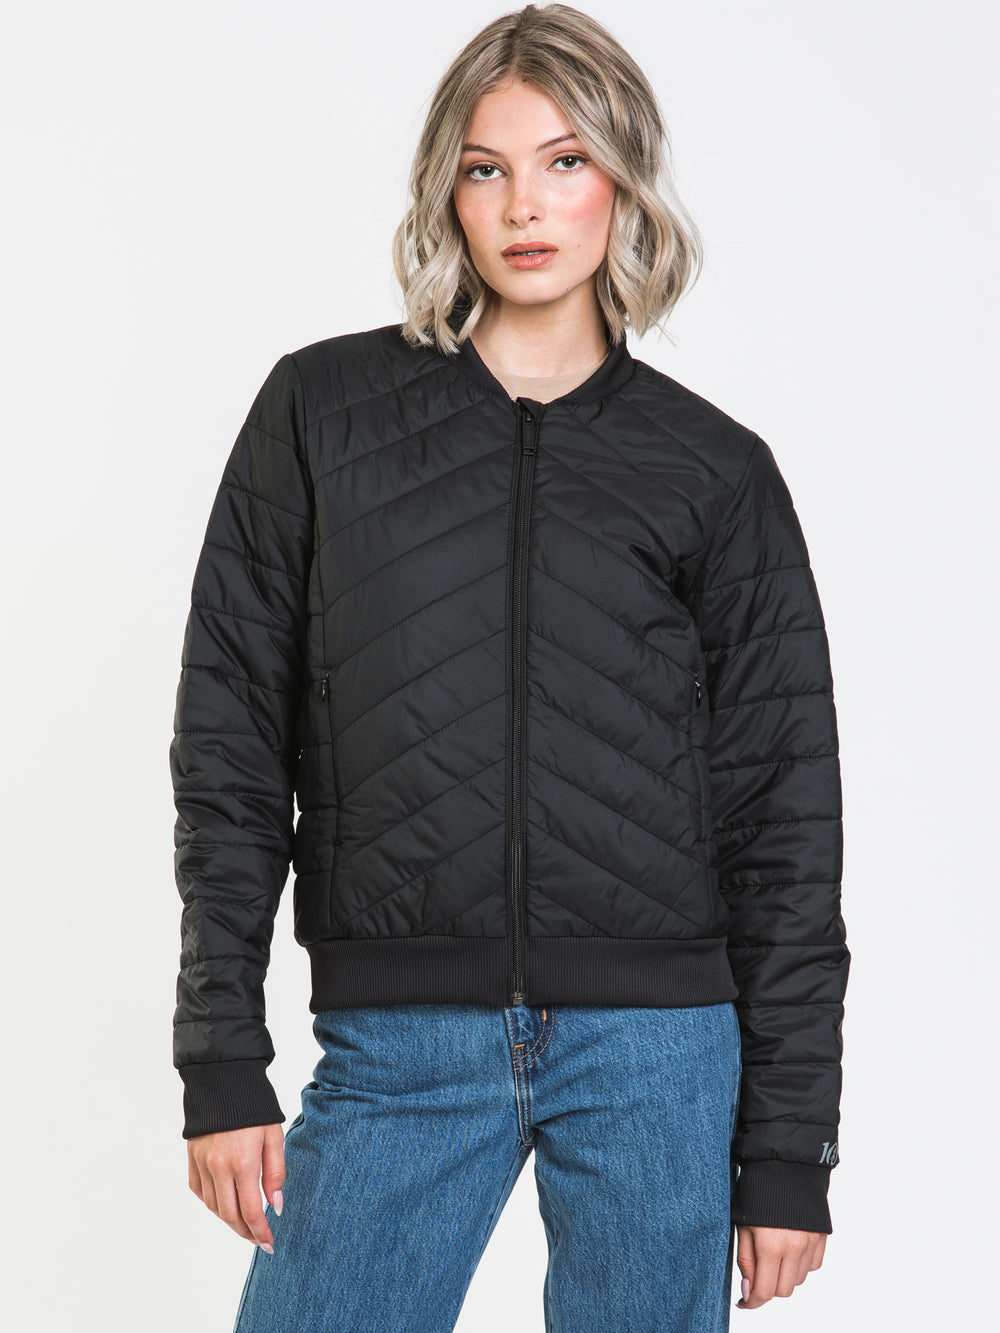 TENTREE CLOUD SHELL BOMBER JACKET - CLEARANCE